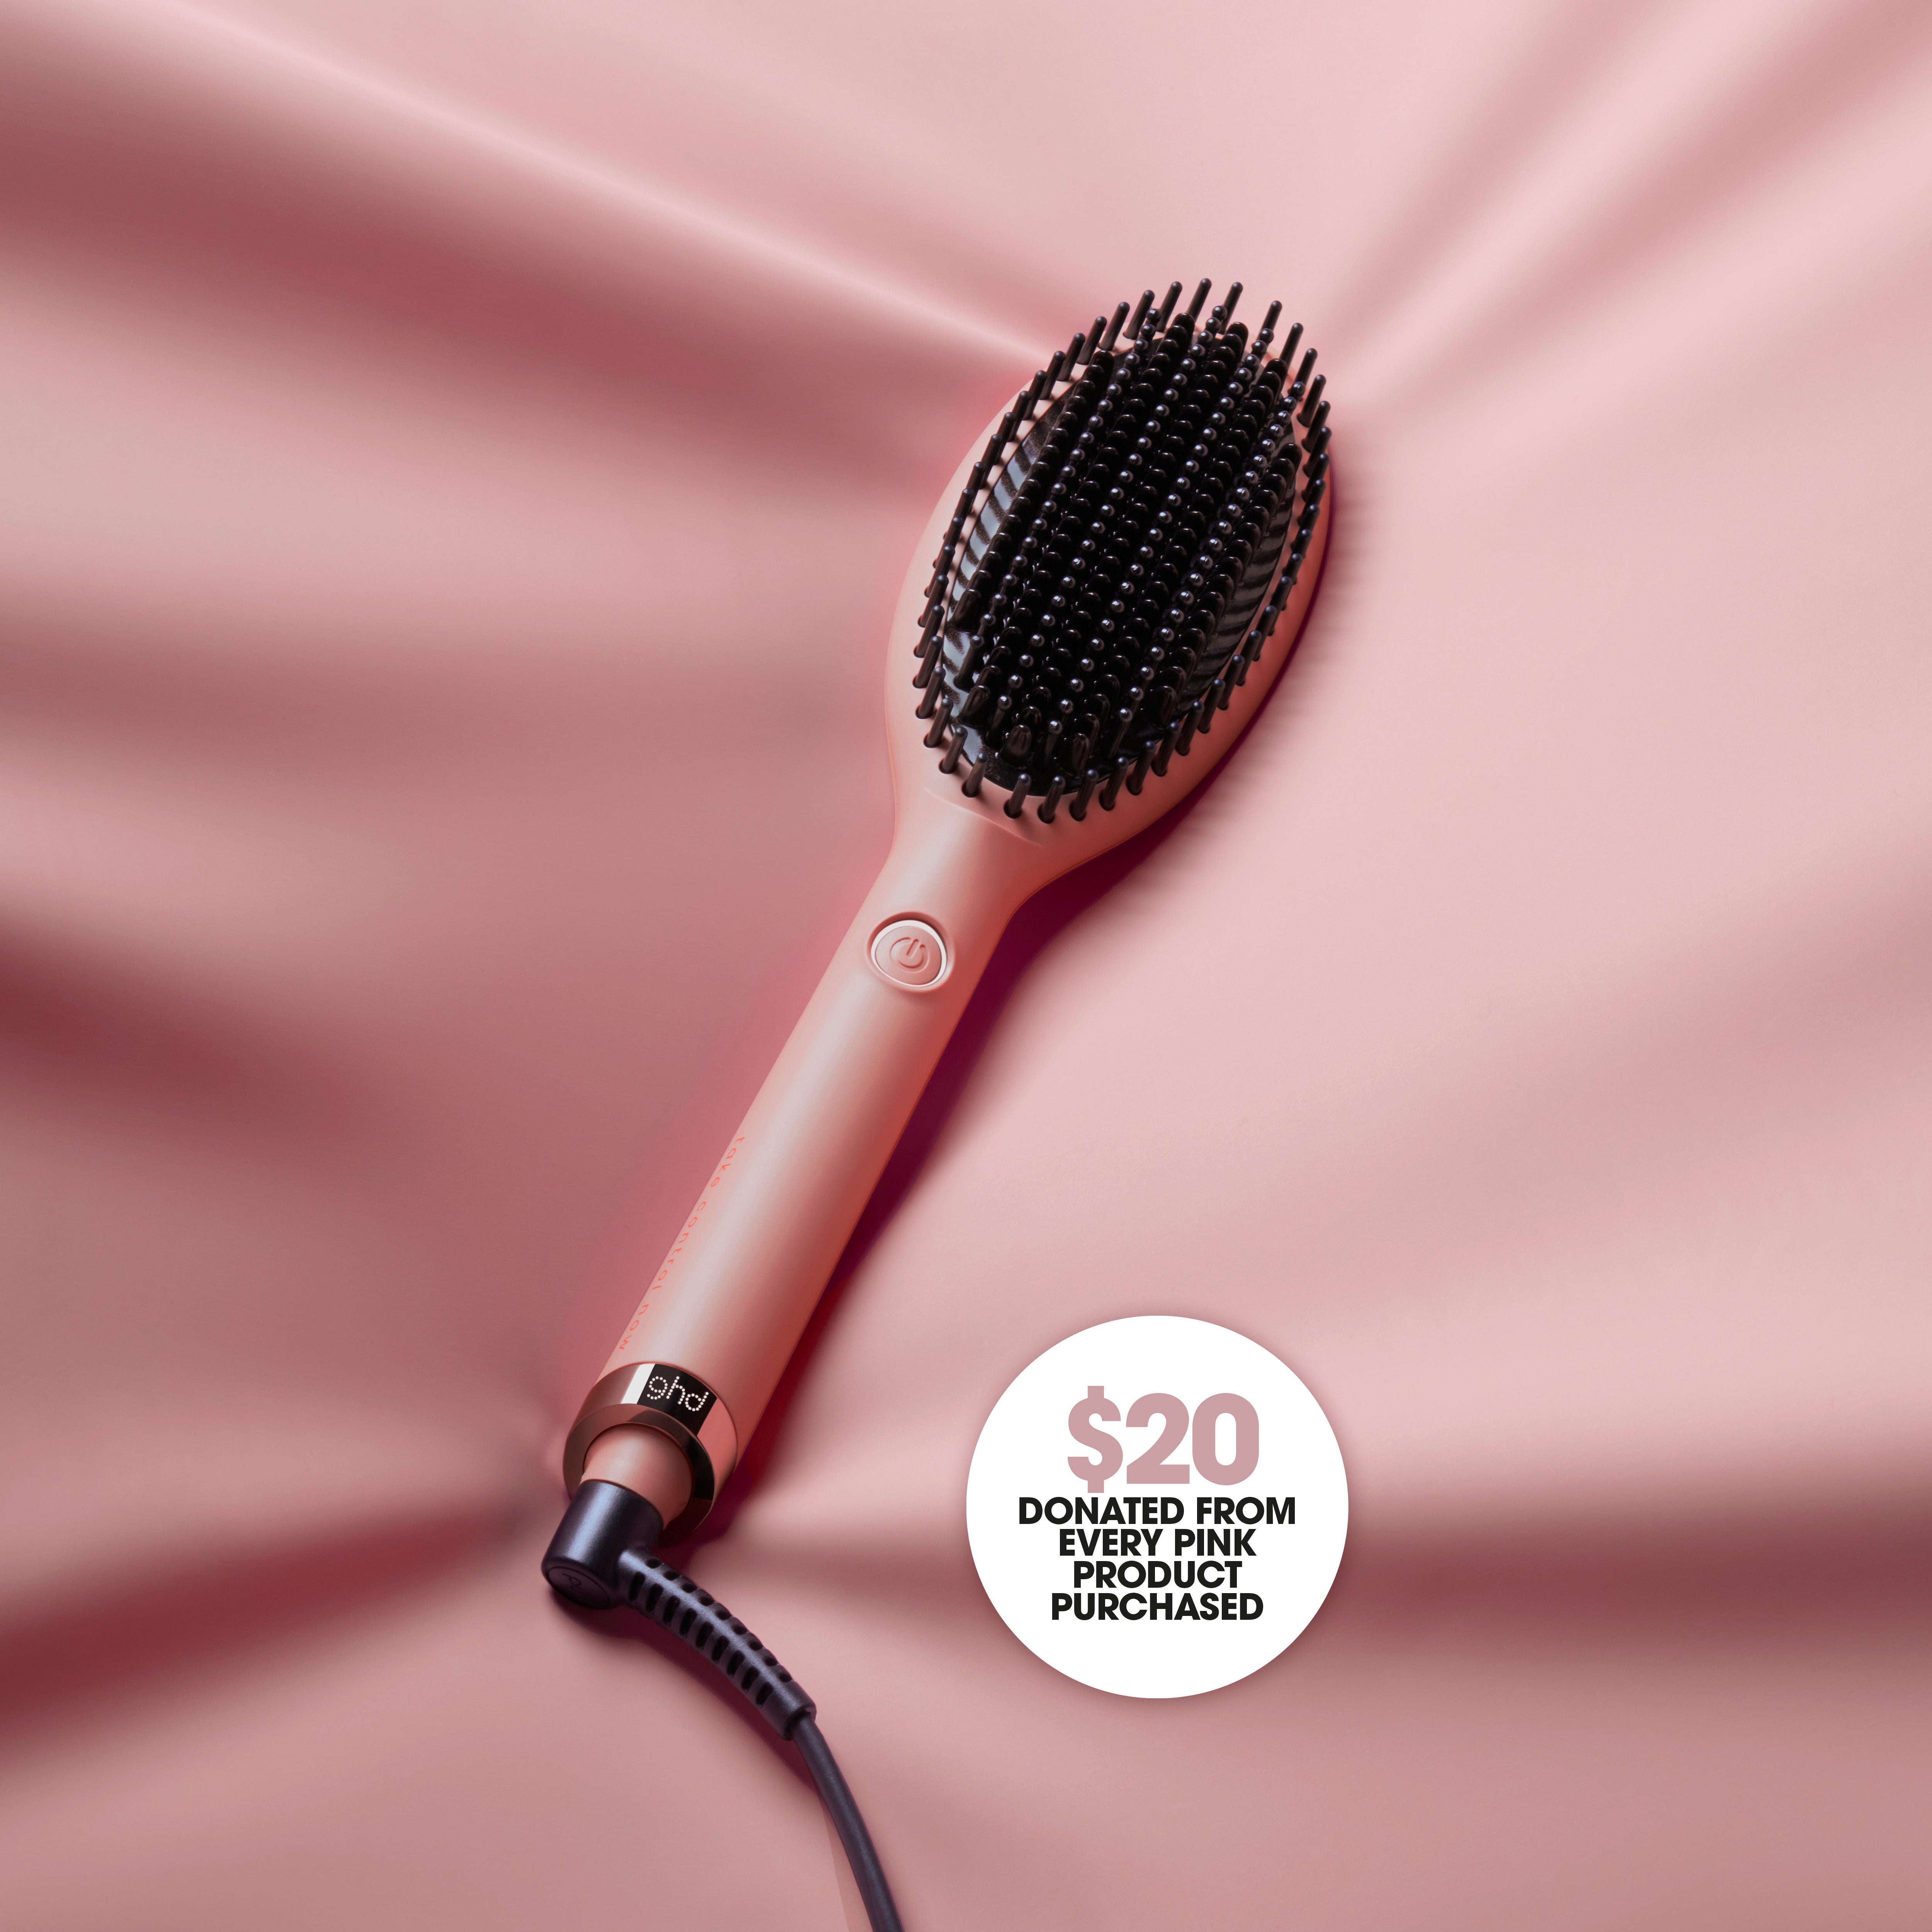 ghd - Feel empowered with limited edition ghd helios™ hair dryer, dressed  in a pink peach coat and boldly adorned with our 'Take Control Now'  self-check reminder 🎀🍑✨ #ghdpink #takecontrolnow